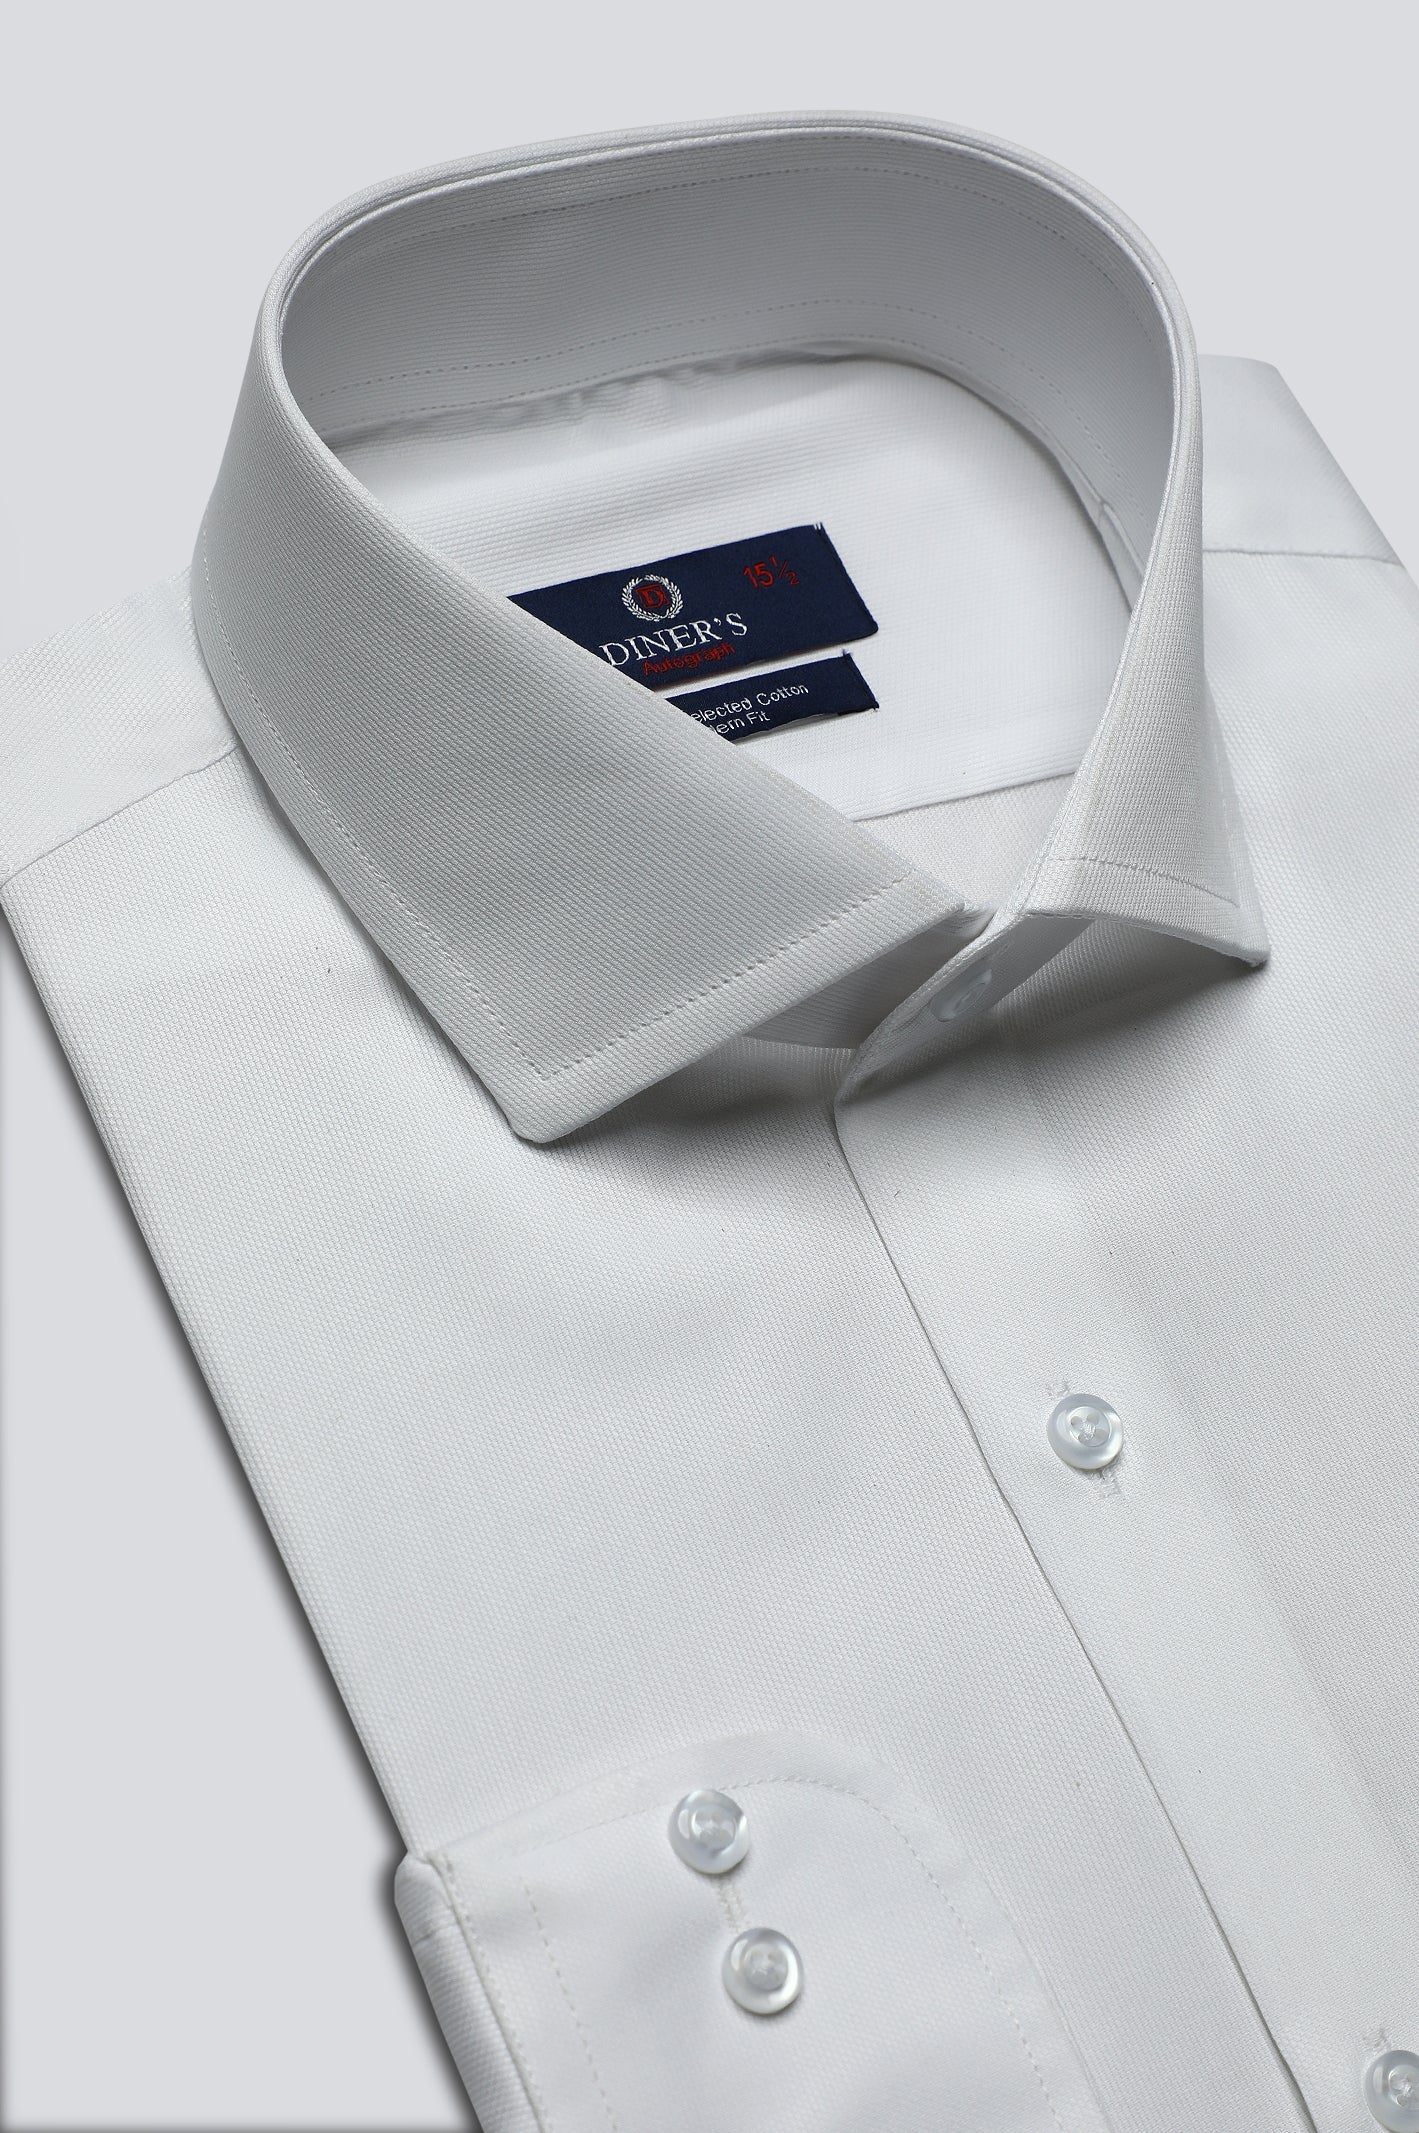 White Oxford Formal Autograph Shirt for Men - Diners